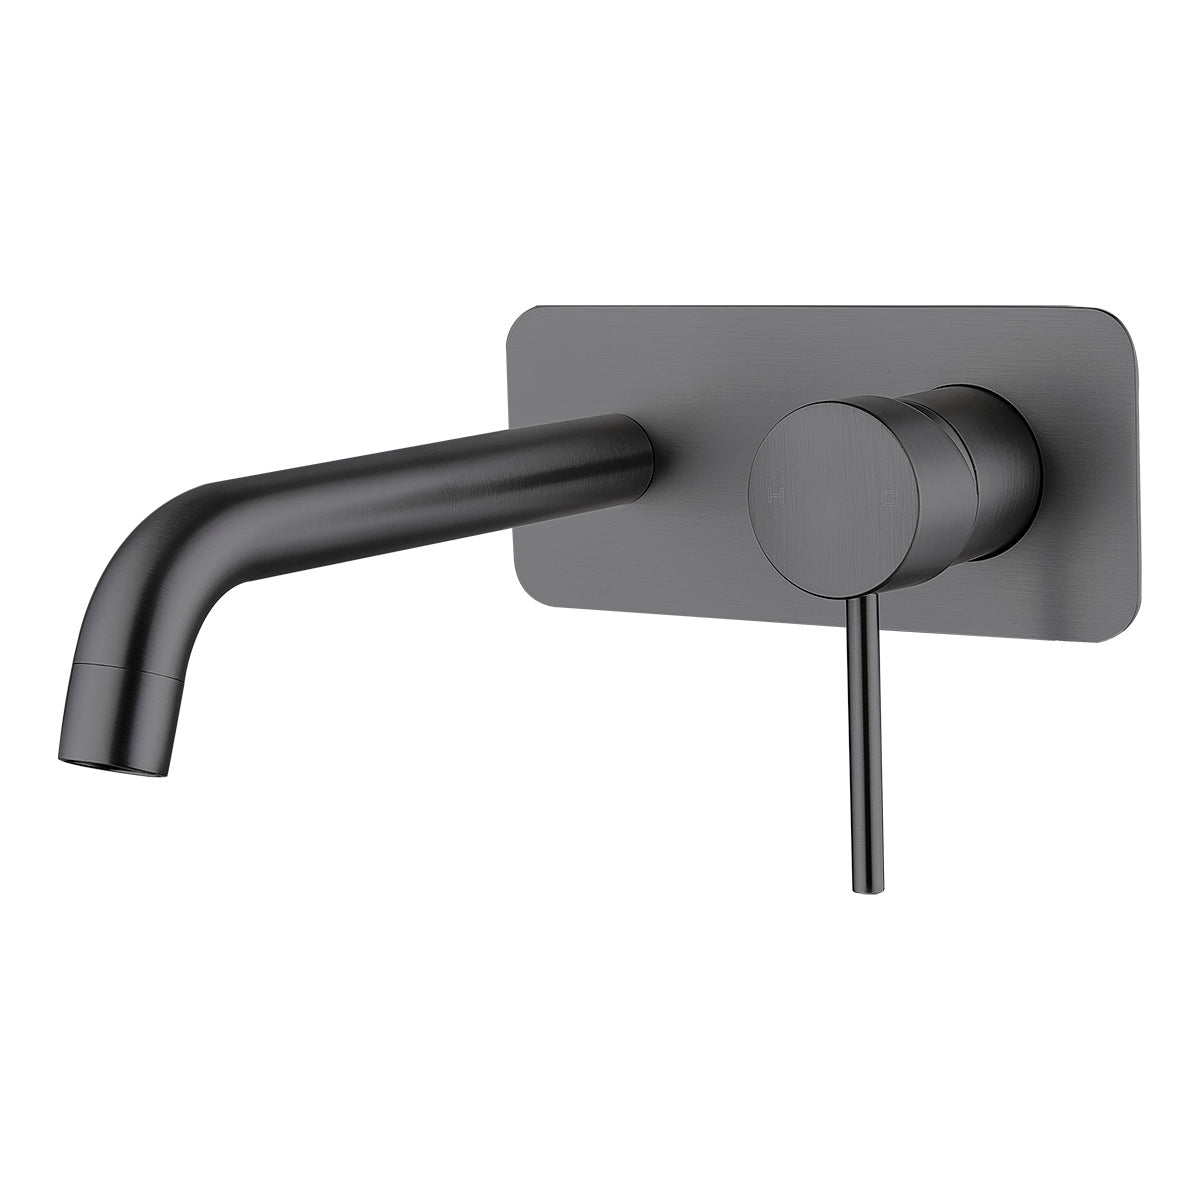 HELLYCAR IDEAL WALL MIXER WITH OUTLET 209MM BRUSHED GUN METAL